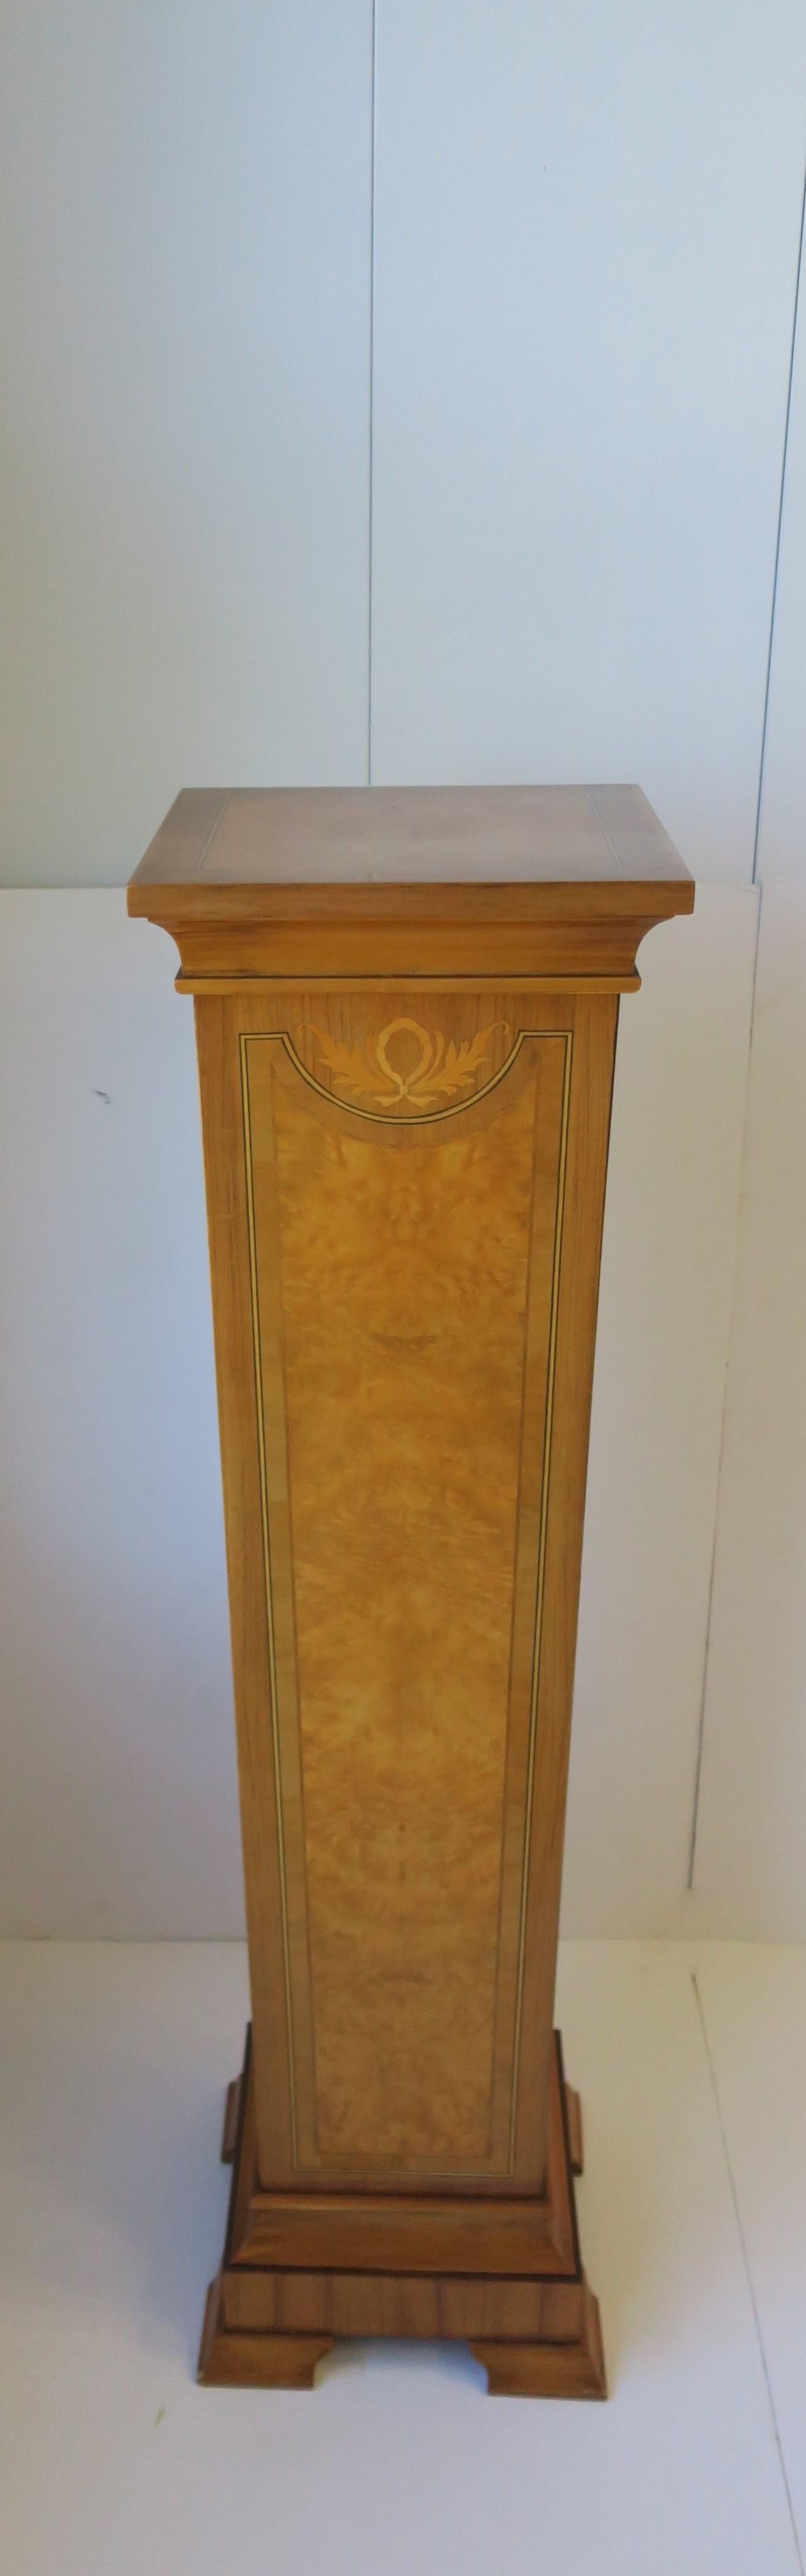 A beautiful and substantial pedestal column with a satin inlay and burl wood style design veneer. Piece is similar to the iconic Tuscan column and would work well for a sculpture piece or plant.

Column measures: 44.5